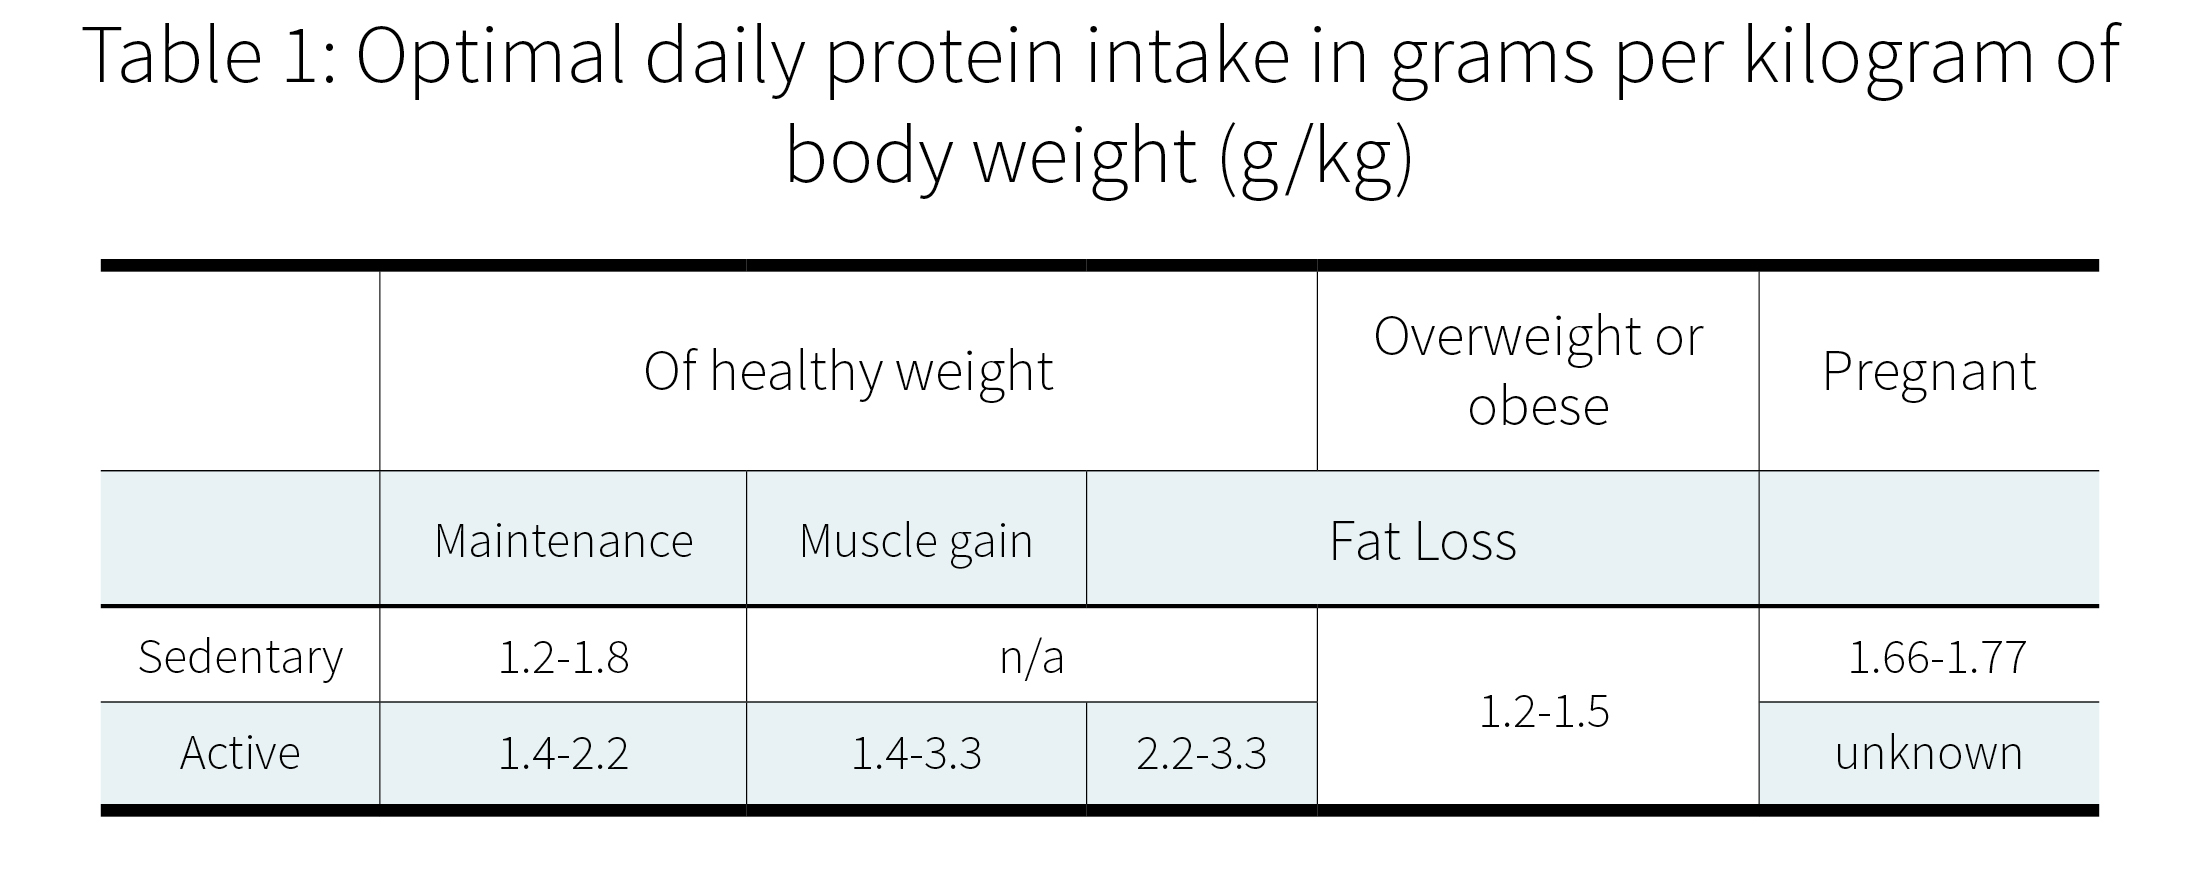 how many grams of protein per kg to build muscle